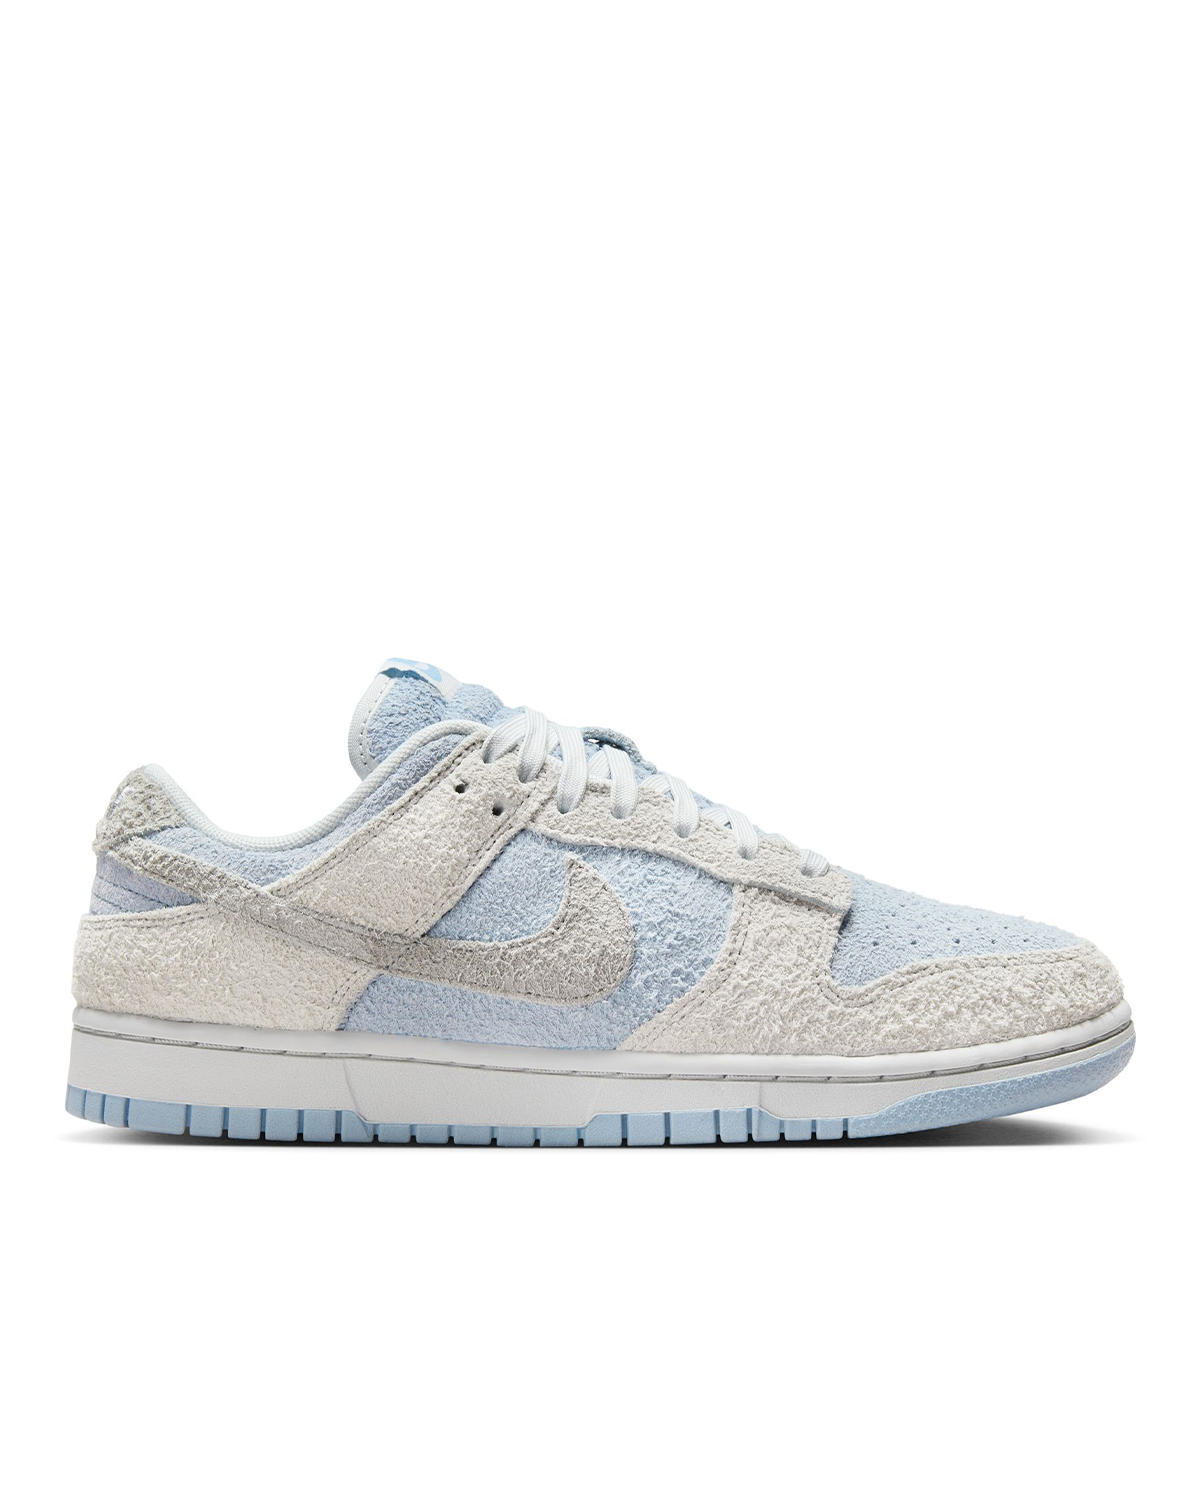 WMNS Dunk Low Light Armory Blue and Photon Dust